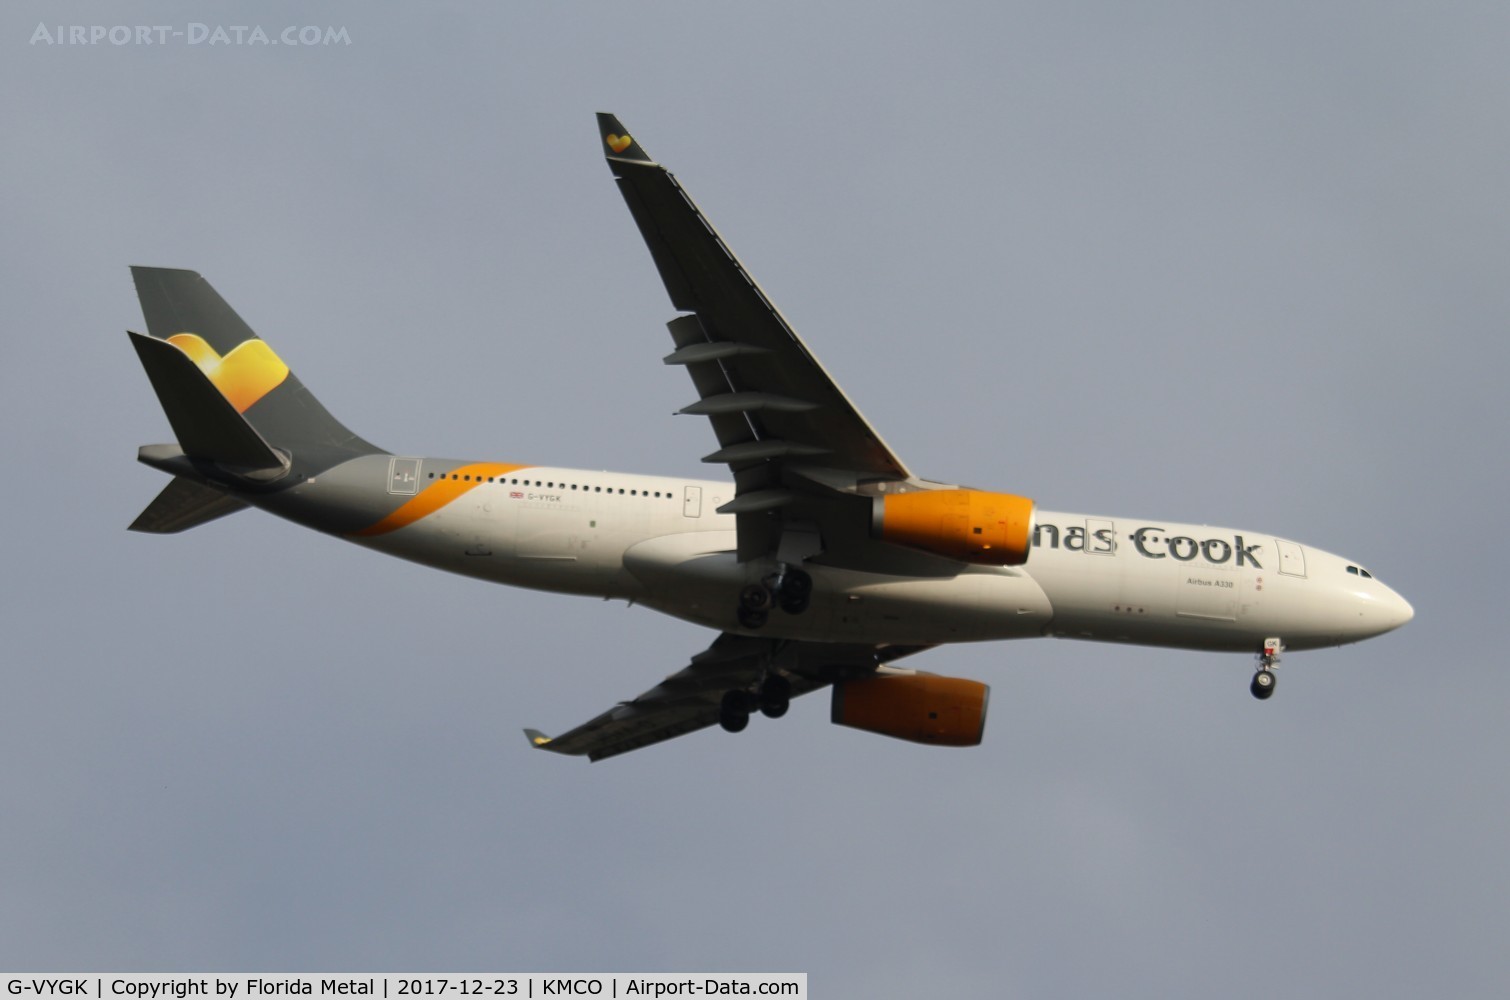 G-VYGK, 2014 Airbus A330-243 C/N 1498, Thomas Cook A332 zx